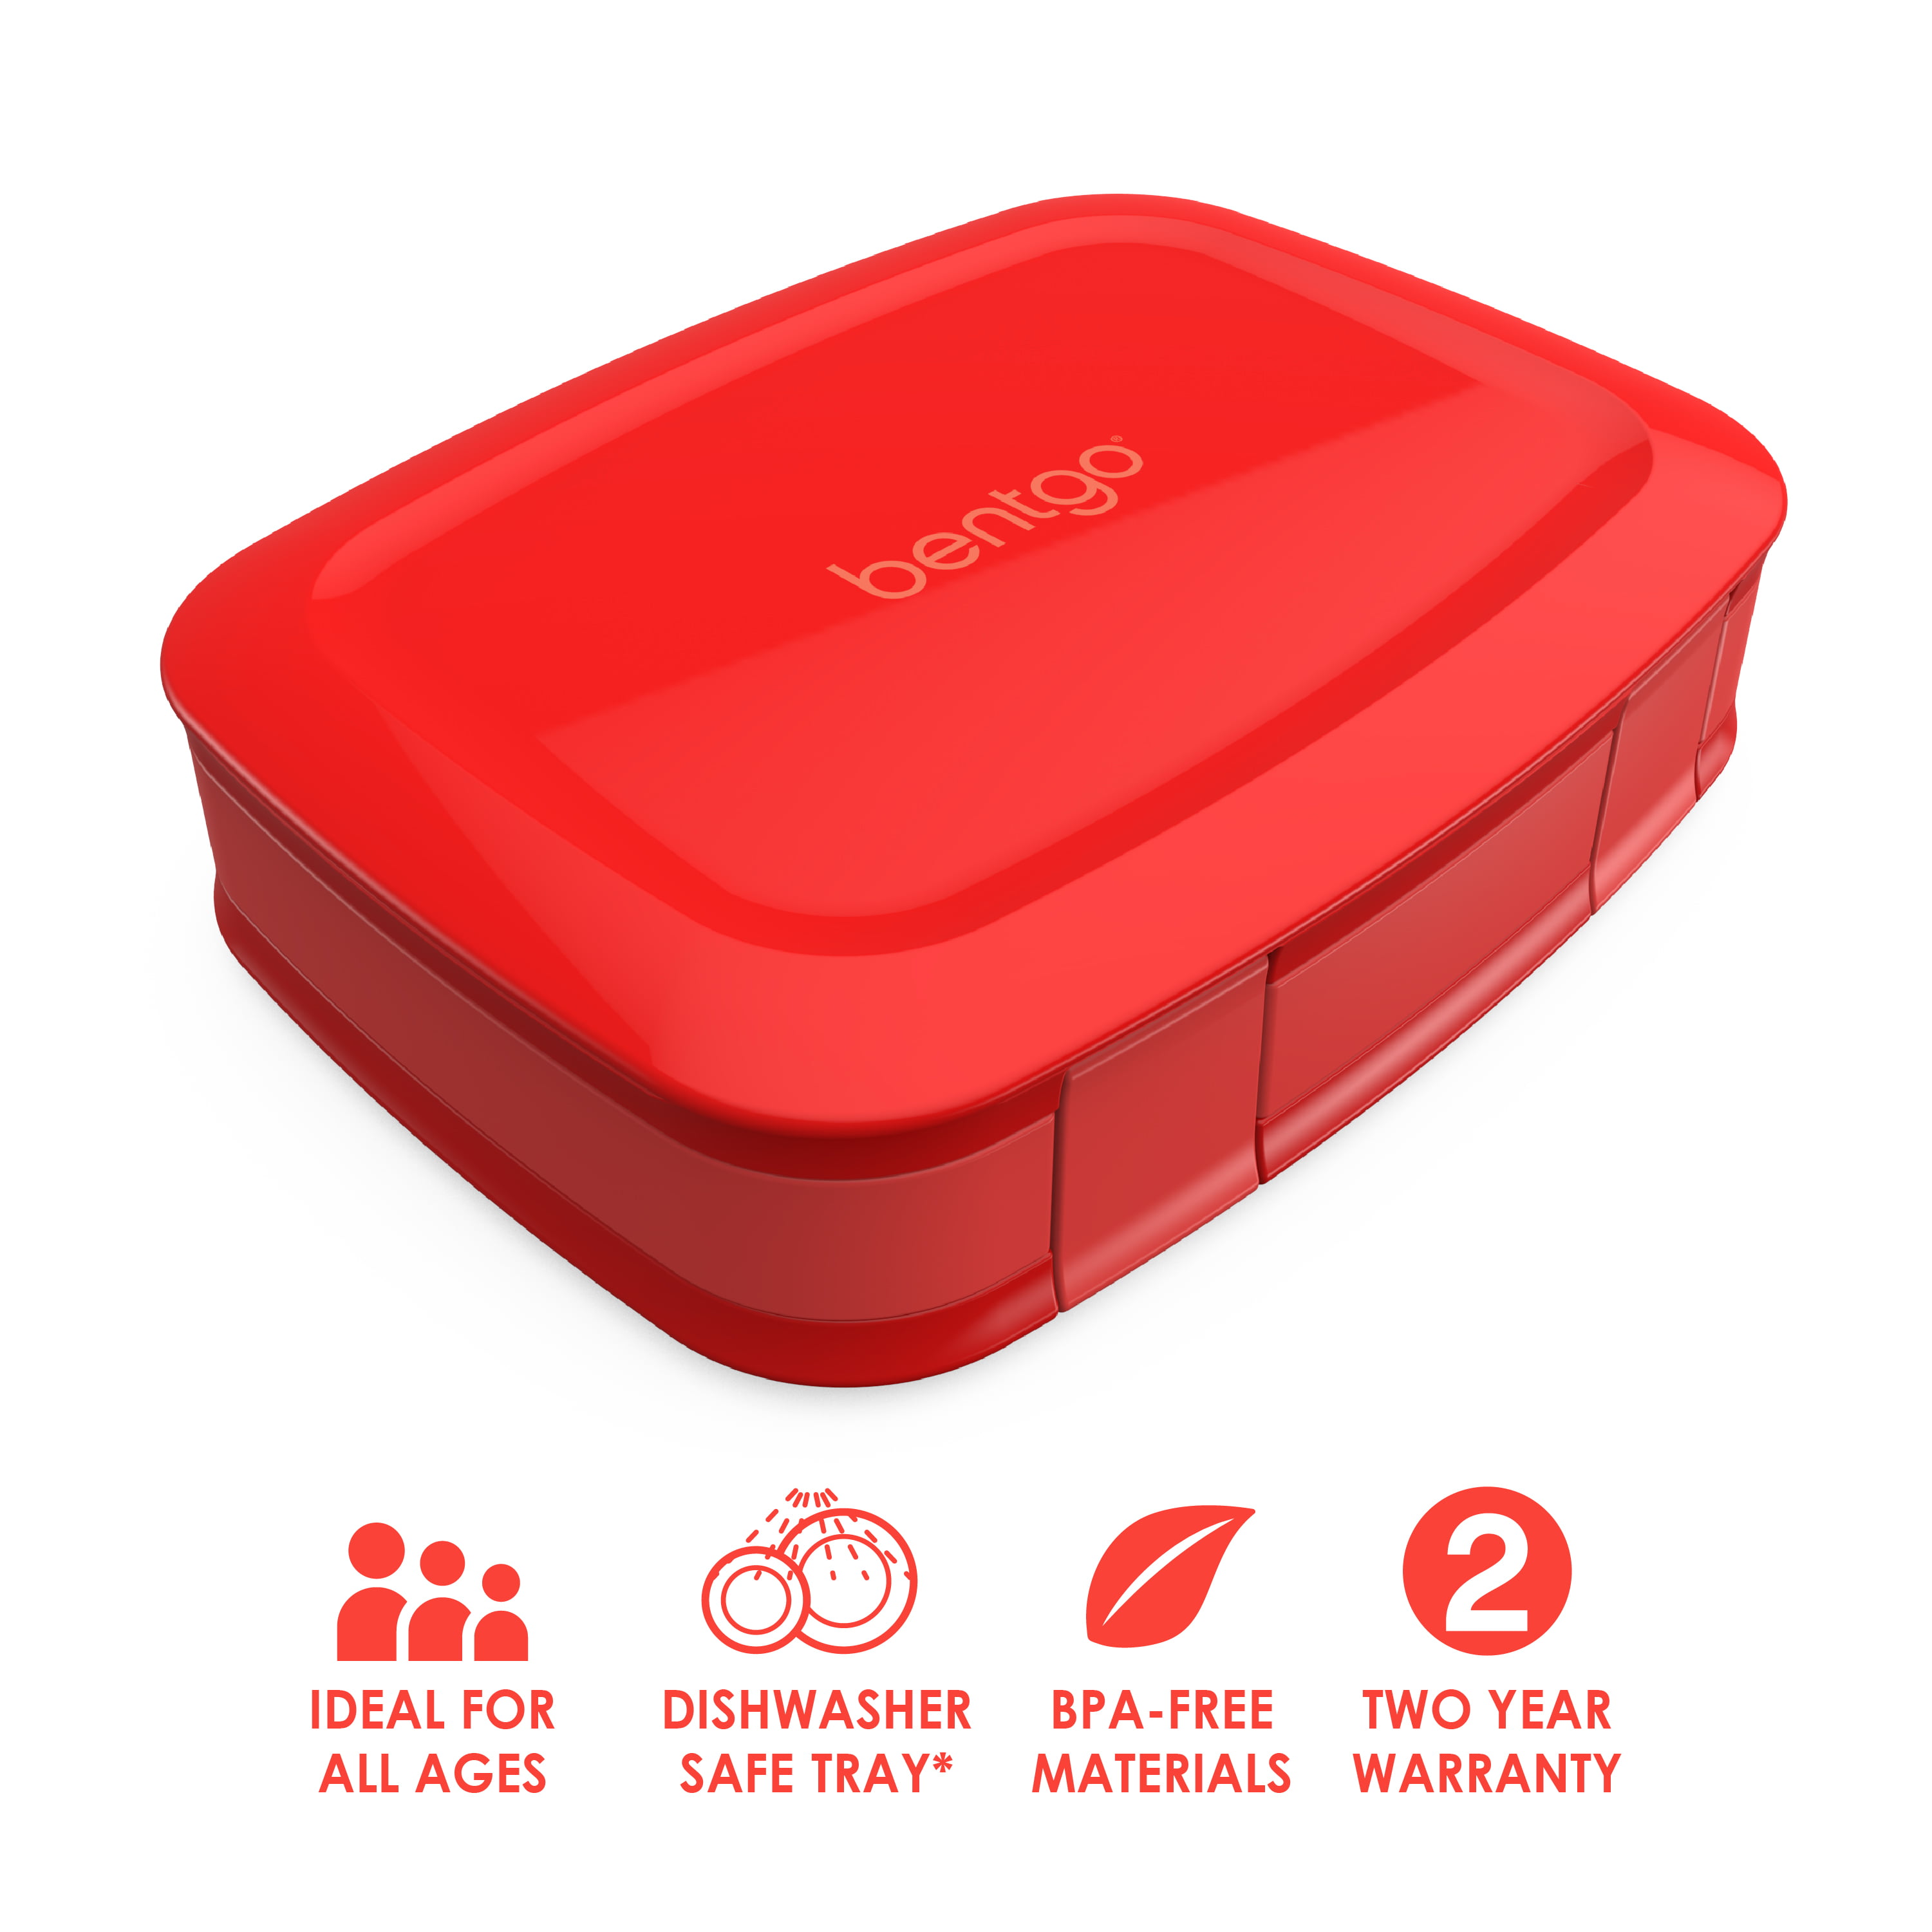 Bentgo Glass Leakproof Lunch Box at Tractor Supply Co.